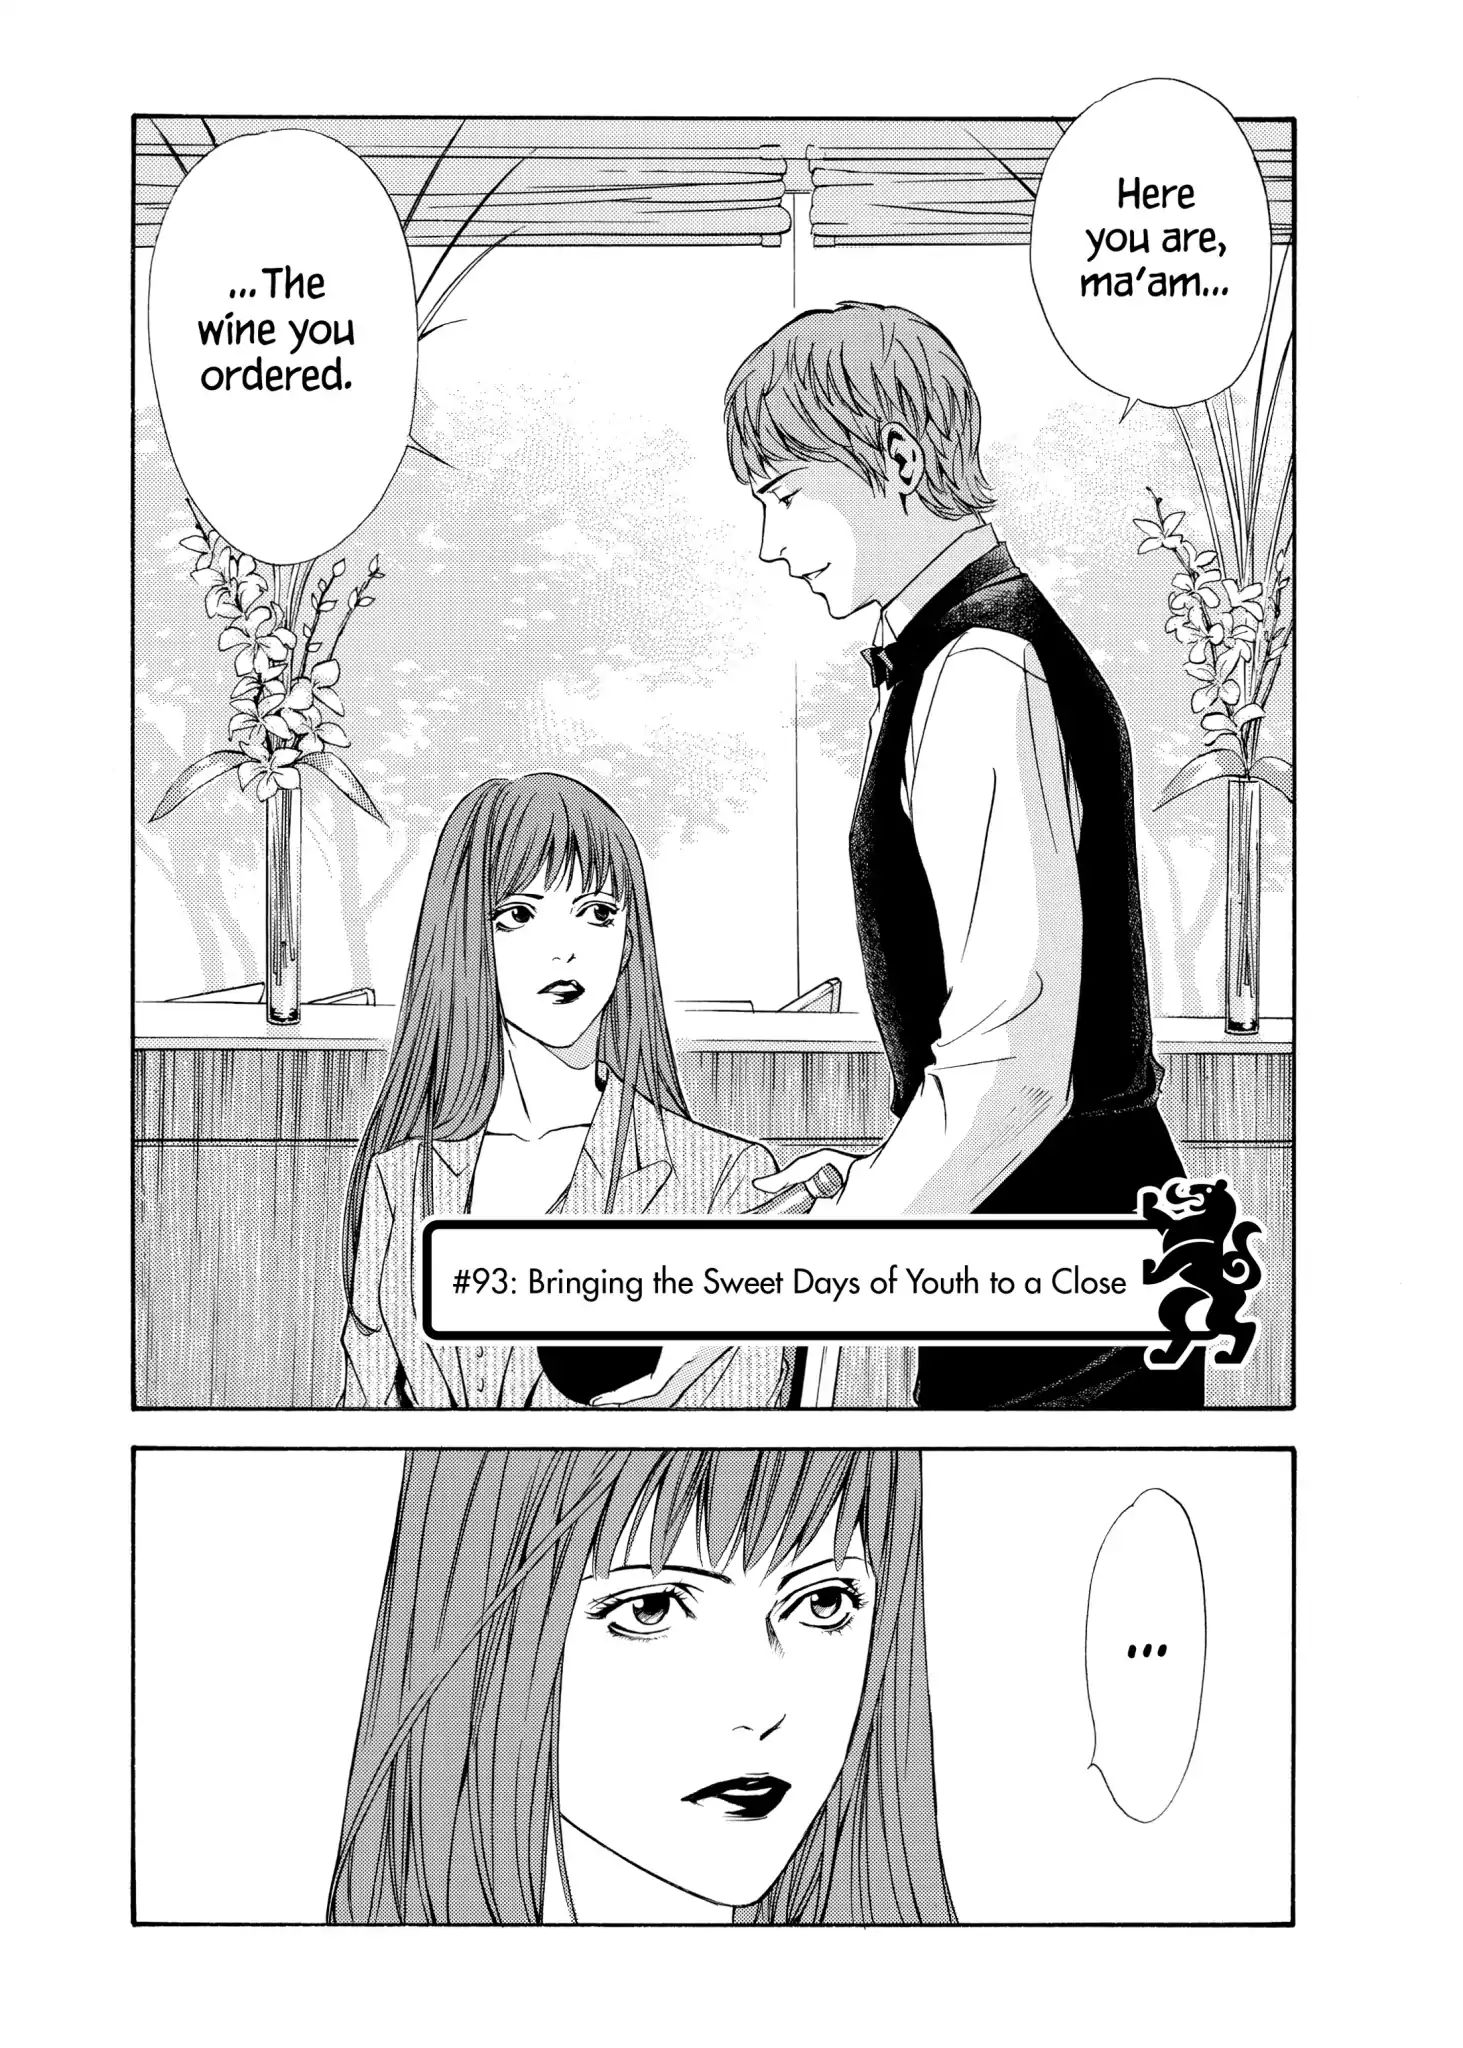 Kami No Shizuku Vol.10 Chapter 93: Bringing The Sweet Days Of Youth To A Close - Picture 1